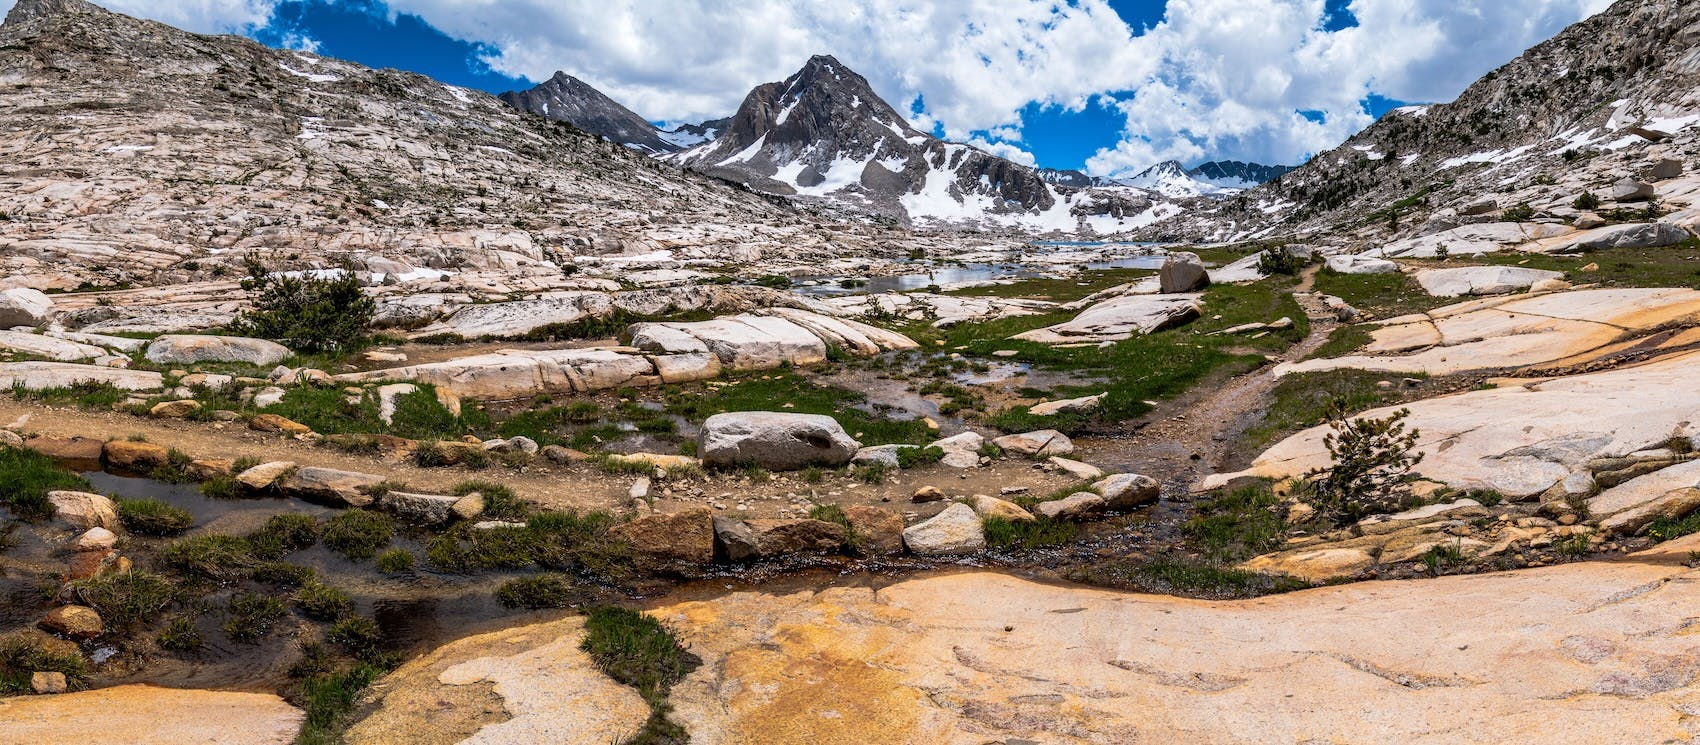 The outlet creek of Sapphire Lake in the Evolution Basin of Kings Canyon National Park